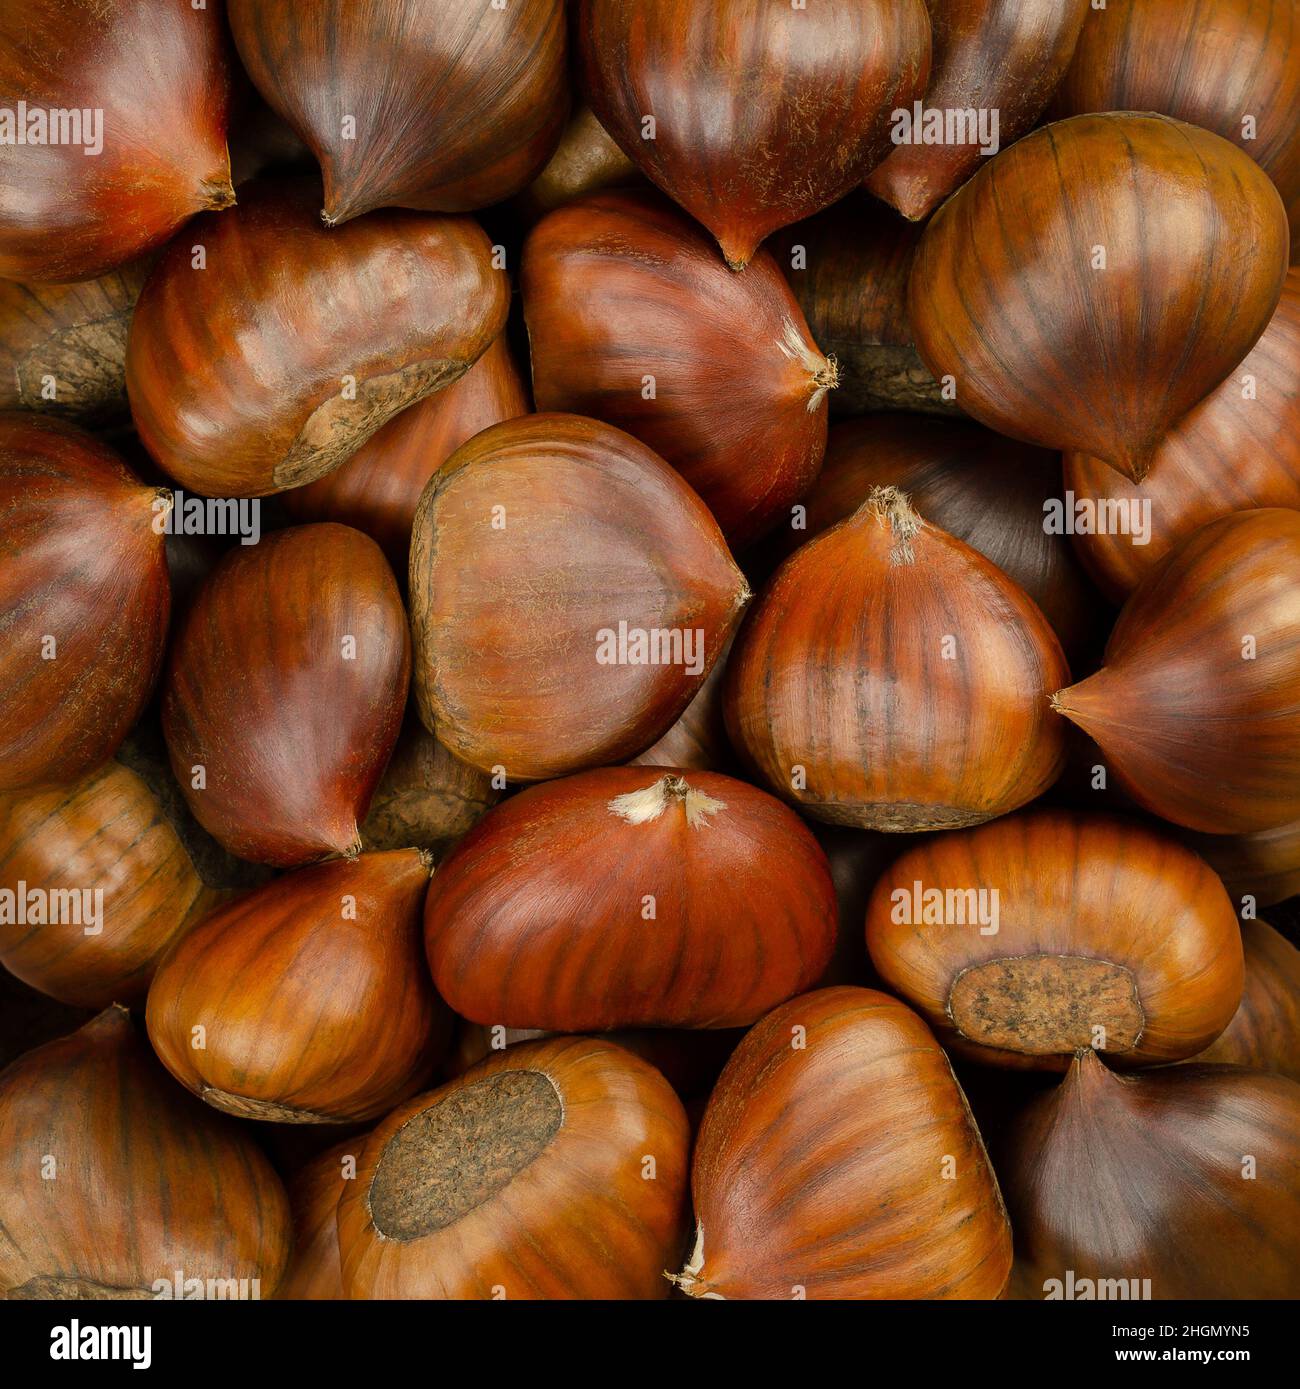 Chestnuts, surface and background. Edible nuts of sweet chestnut, Castanea sativa. They can be eaten raw, candied, cooked, milled or roasted. Stock Photo